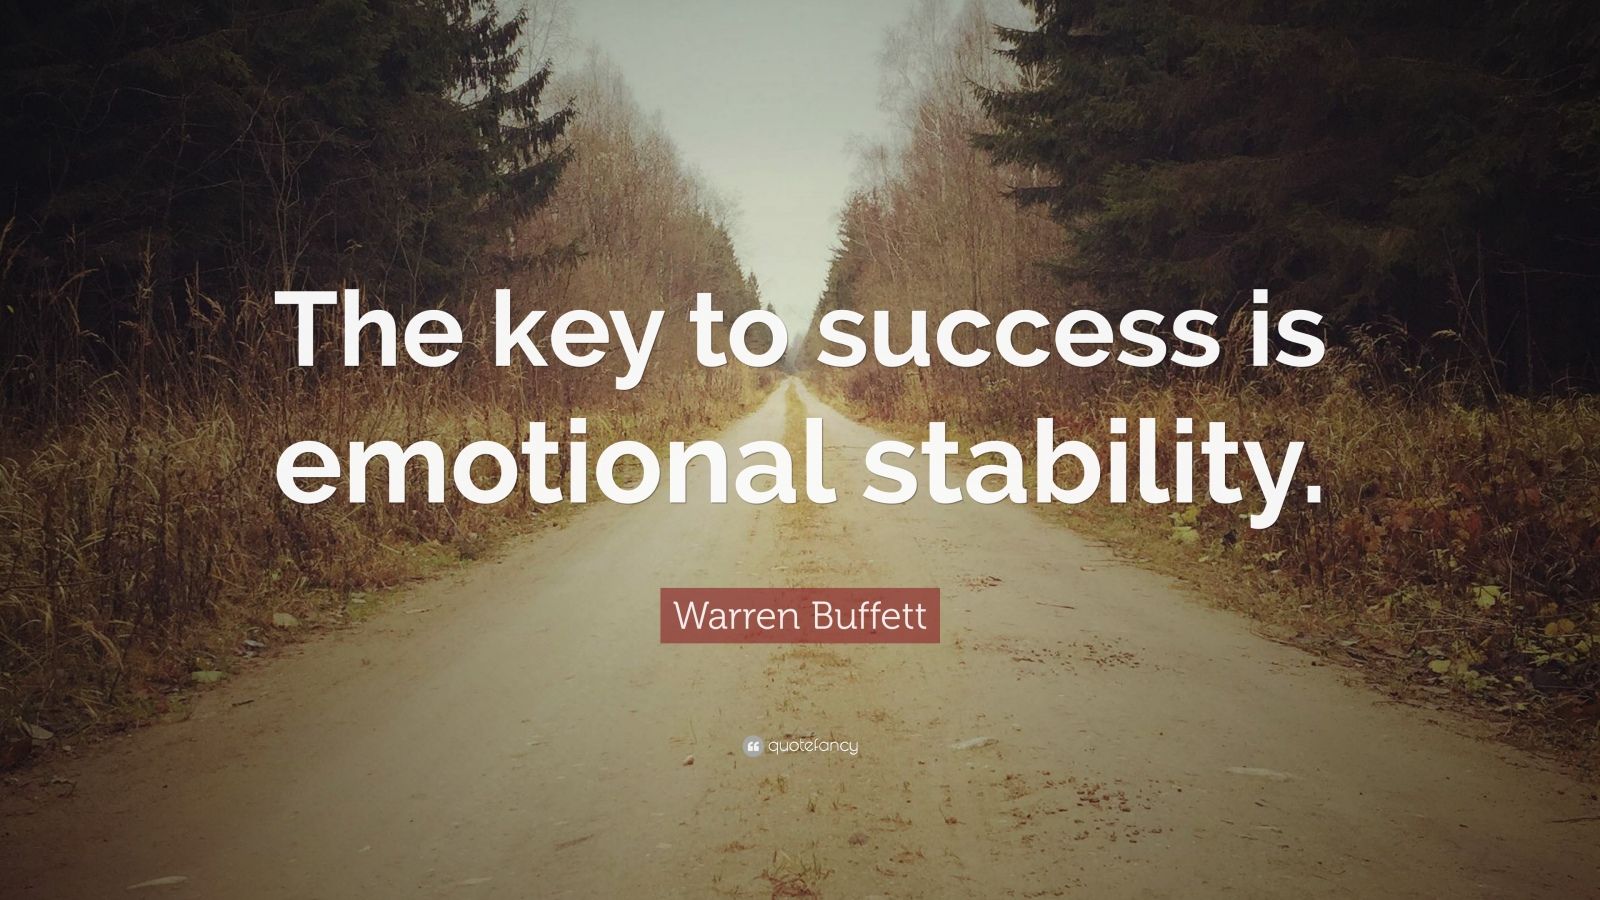 Warren Buffett Quote: “The key to success is emotional stability.”